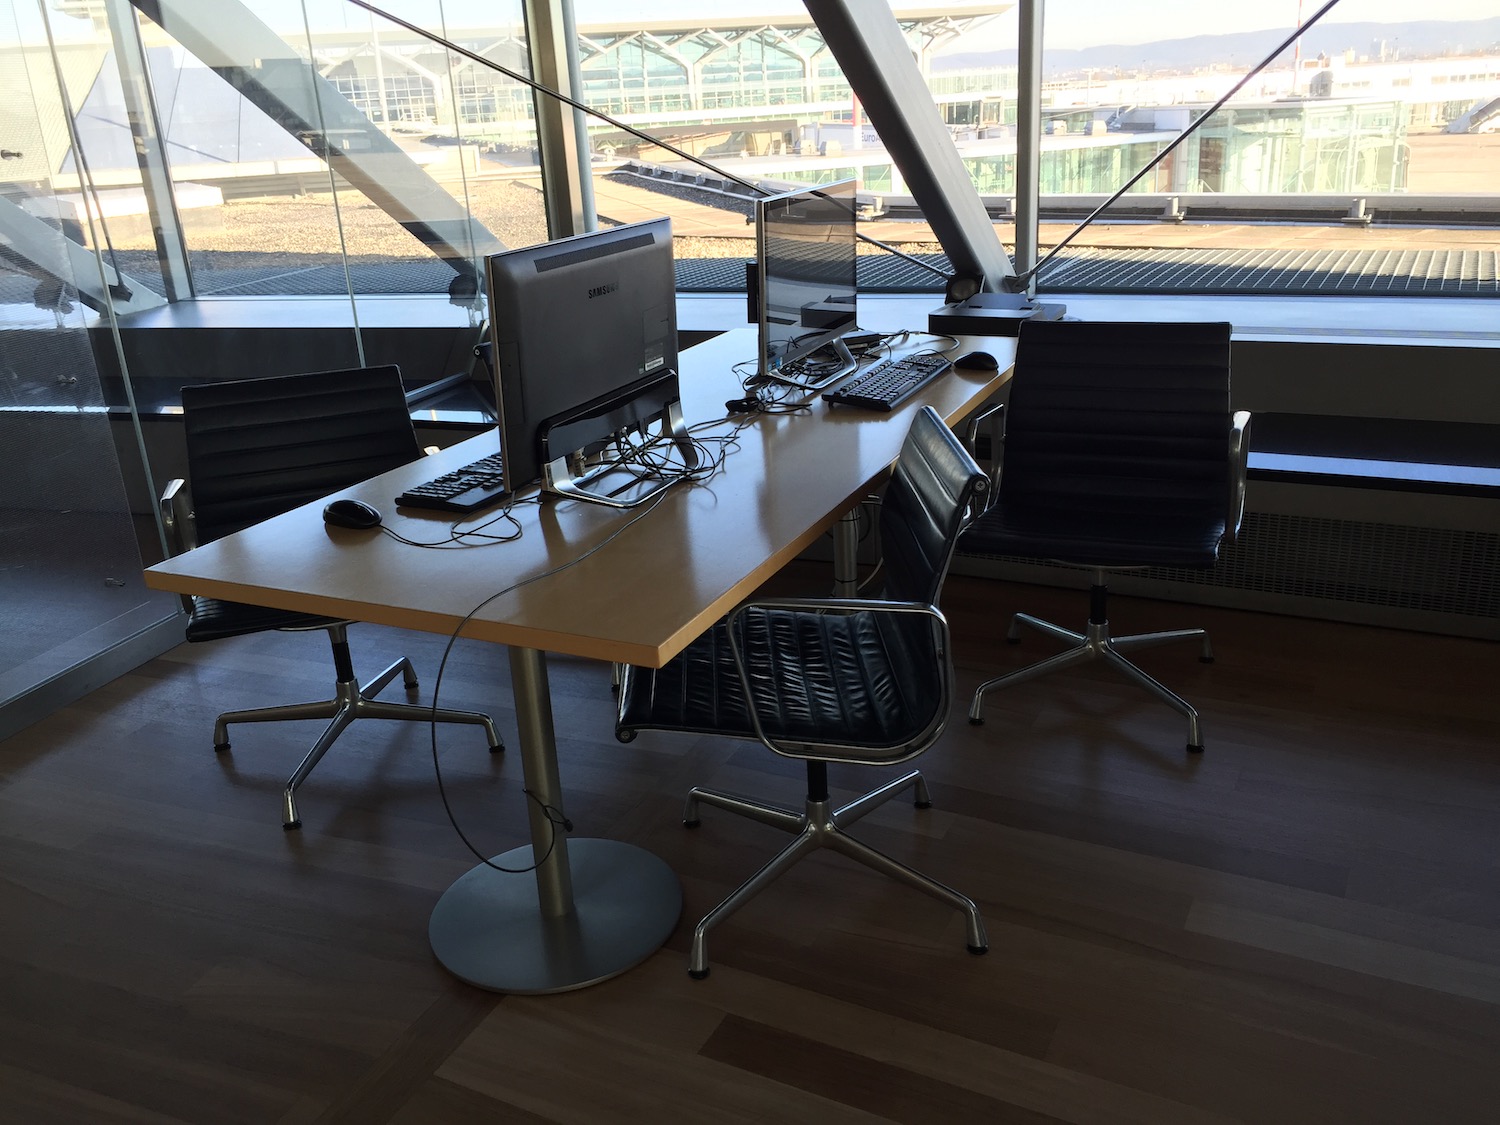 a desk with computers and chairs in a room with windows